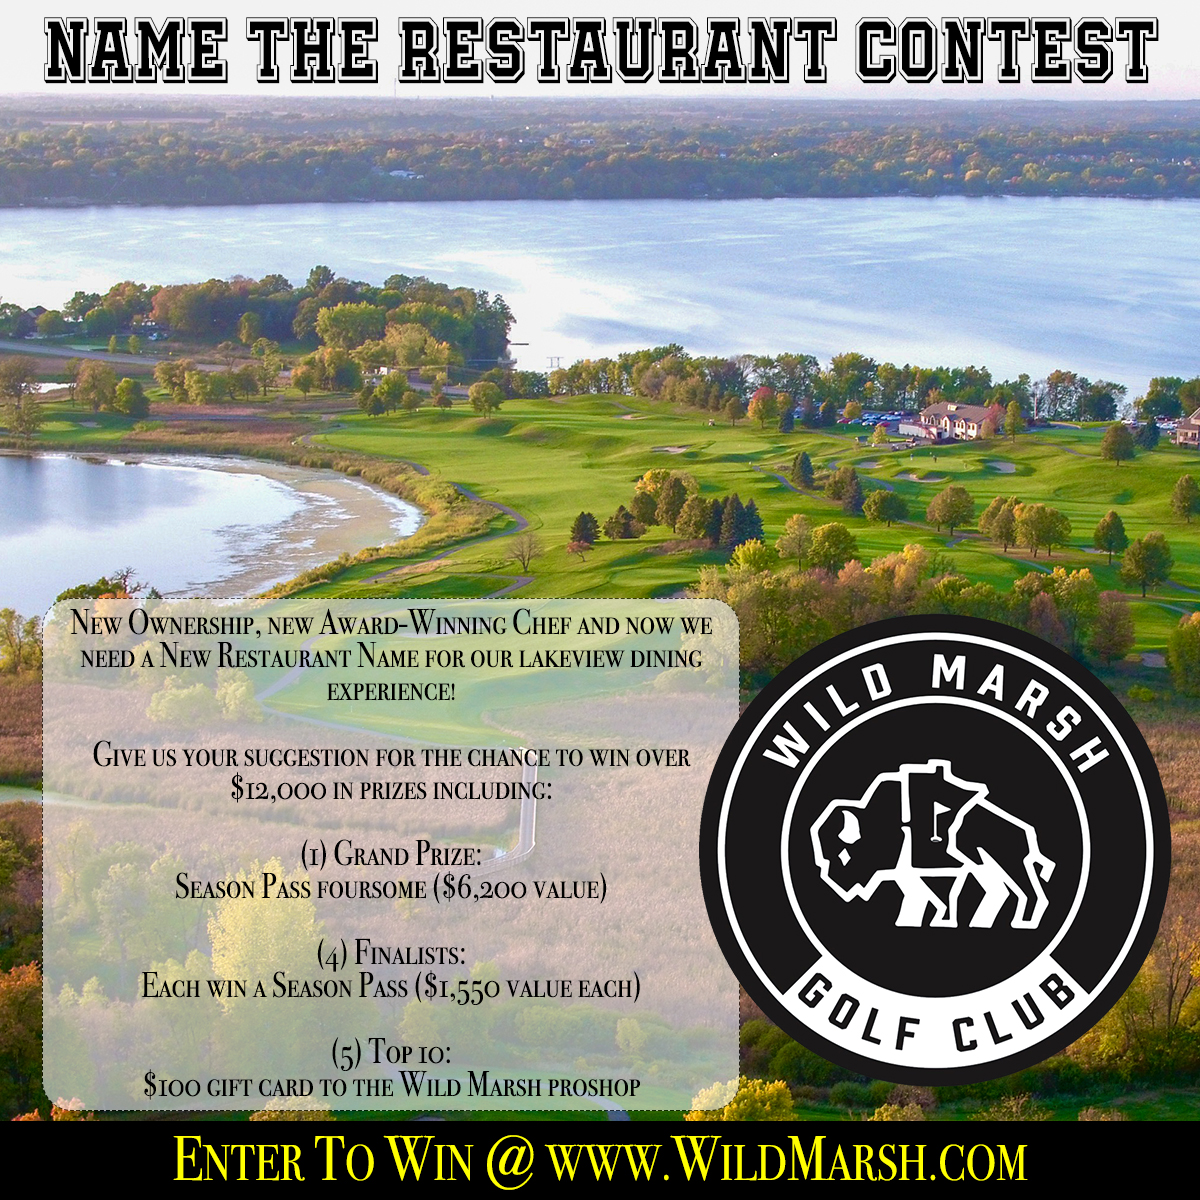 Name the New Restaurant Contest with over $12,000 in prizes! New ownership, new Award-winning Chef, and now we need a new restaurant NAME for our lakeview dining experience! Go to WildMarsh.com to give us your suggestion for the chance to win.